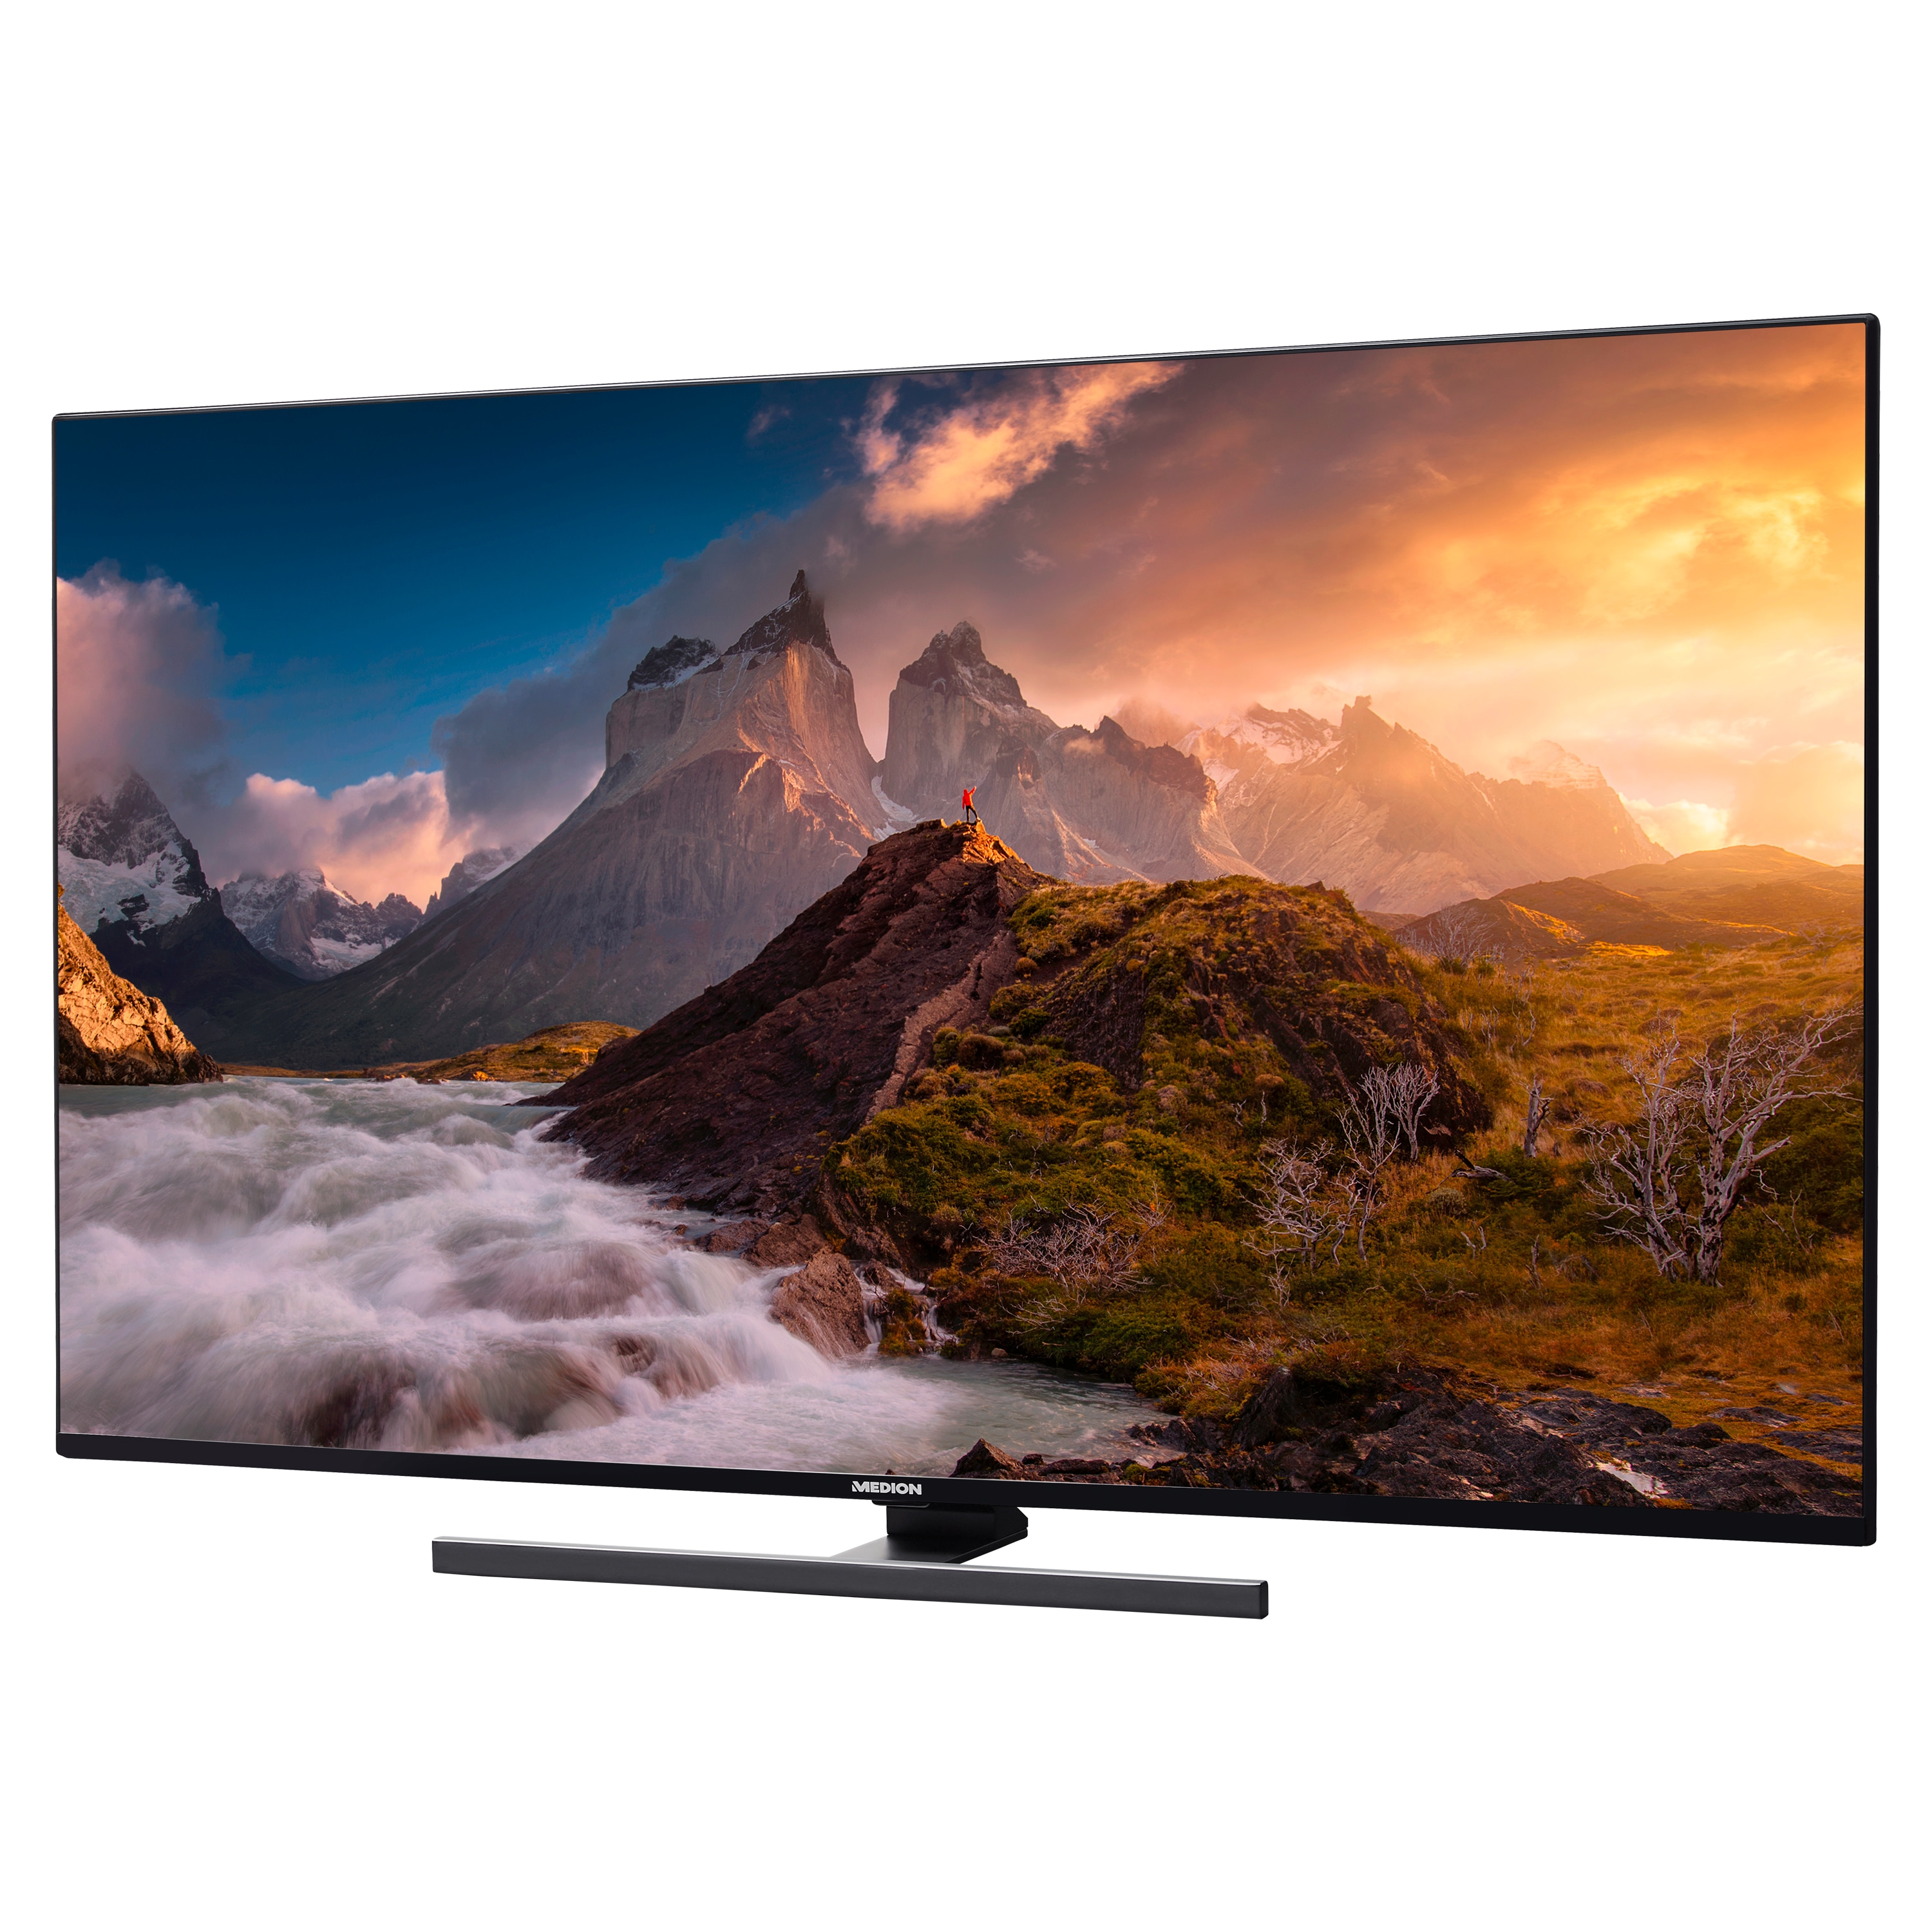 MEDION® LIFE® X15048 (MD 30060) QLED Android TV, 125,7 cm (50'') Ultra HD Smart-TV, HDR, Dolby Vision®, Micro Dimming, MEMC, PVR ready, Netflix, Amazon Prime Video, Bluetooth®, DTS Virtual X, DTS X und Dolby Atmos Unterstützung, HD Triple Tuner